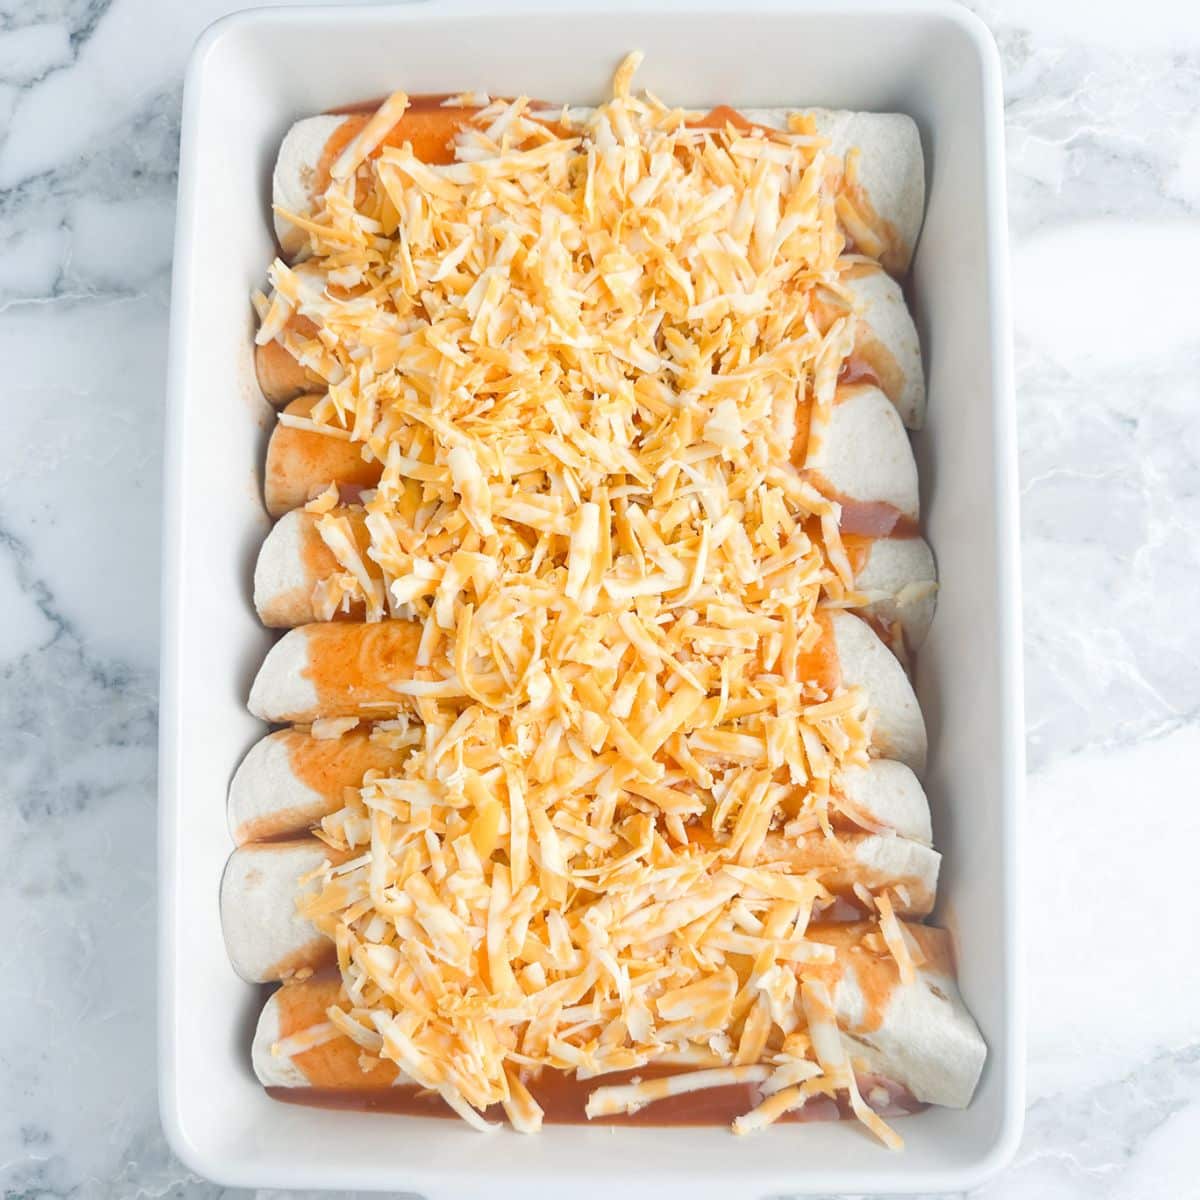 Casserole dish with enchiladas topped with sauce and shredded cheese.